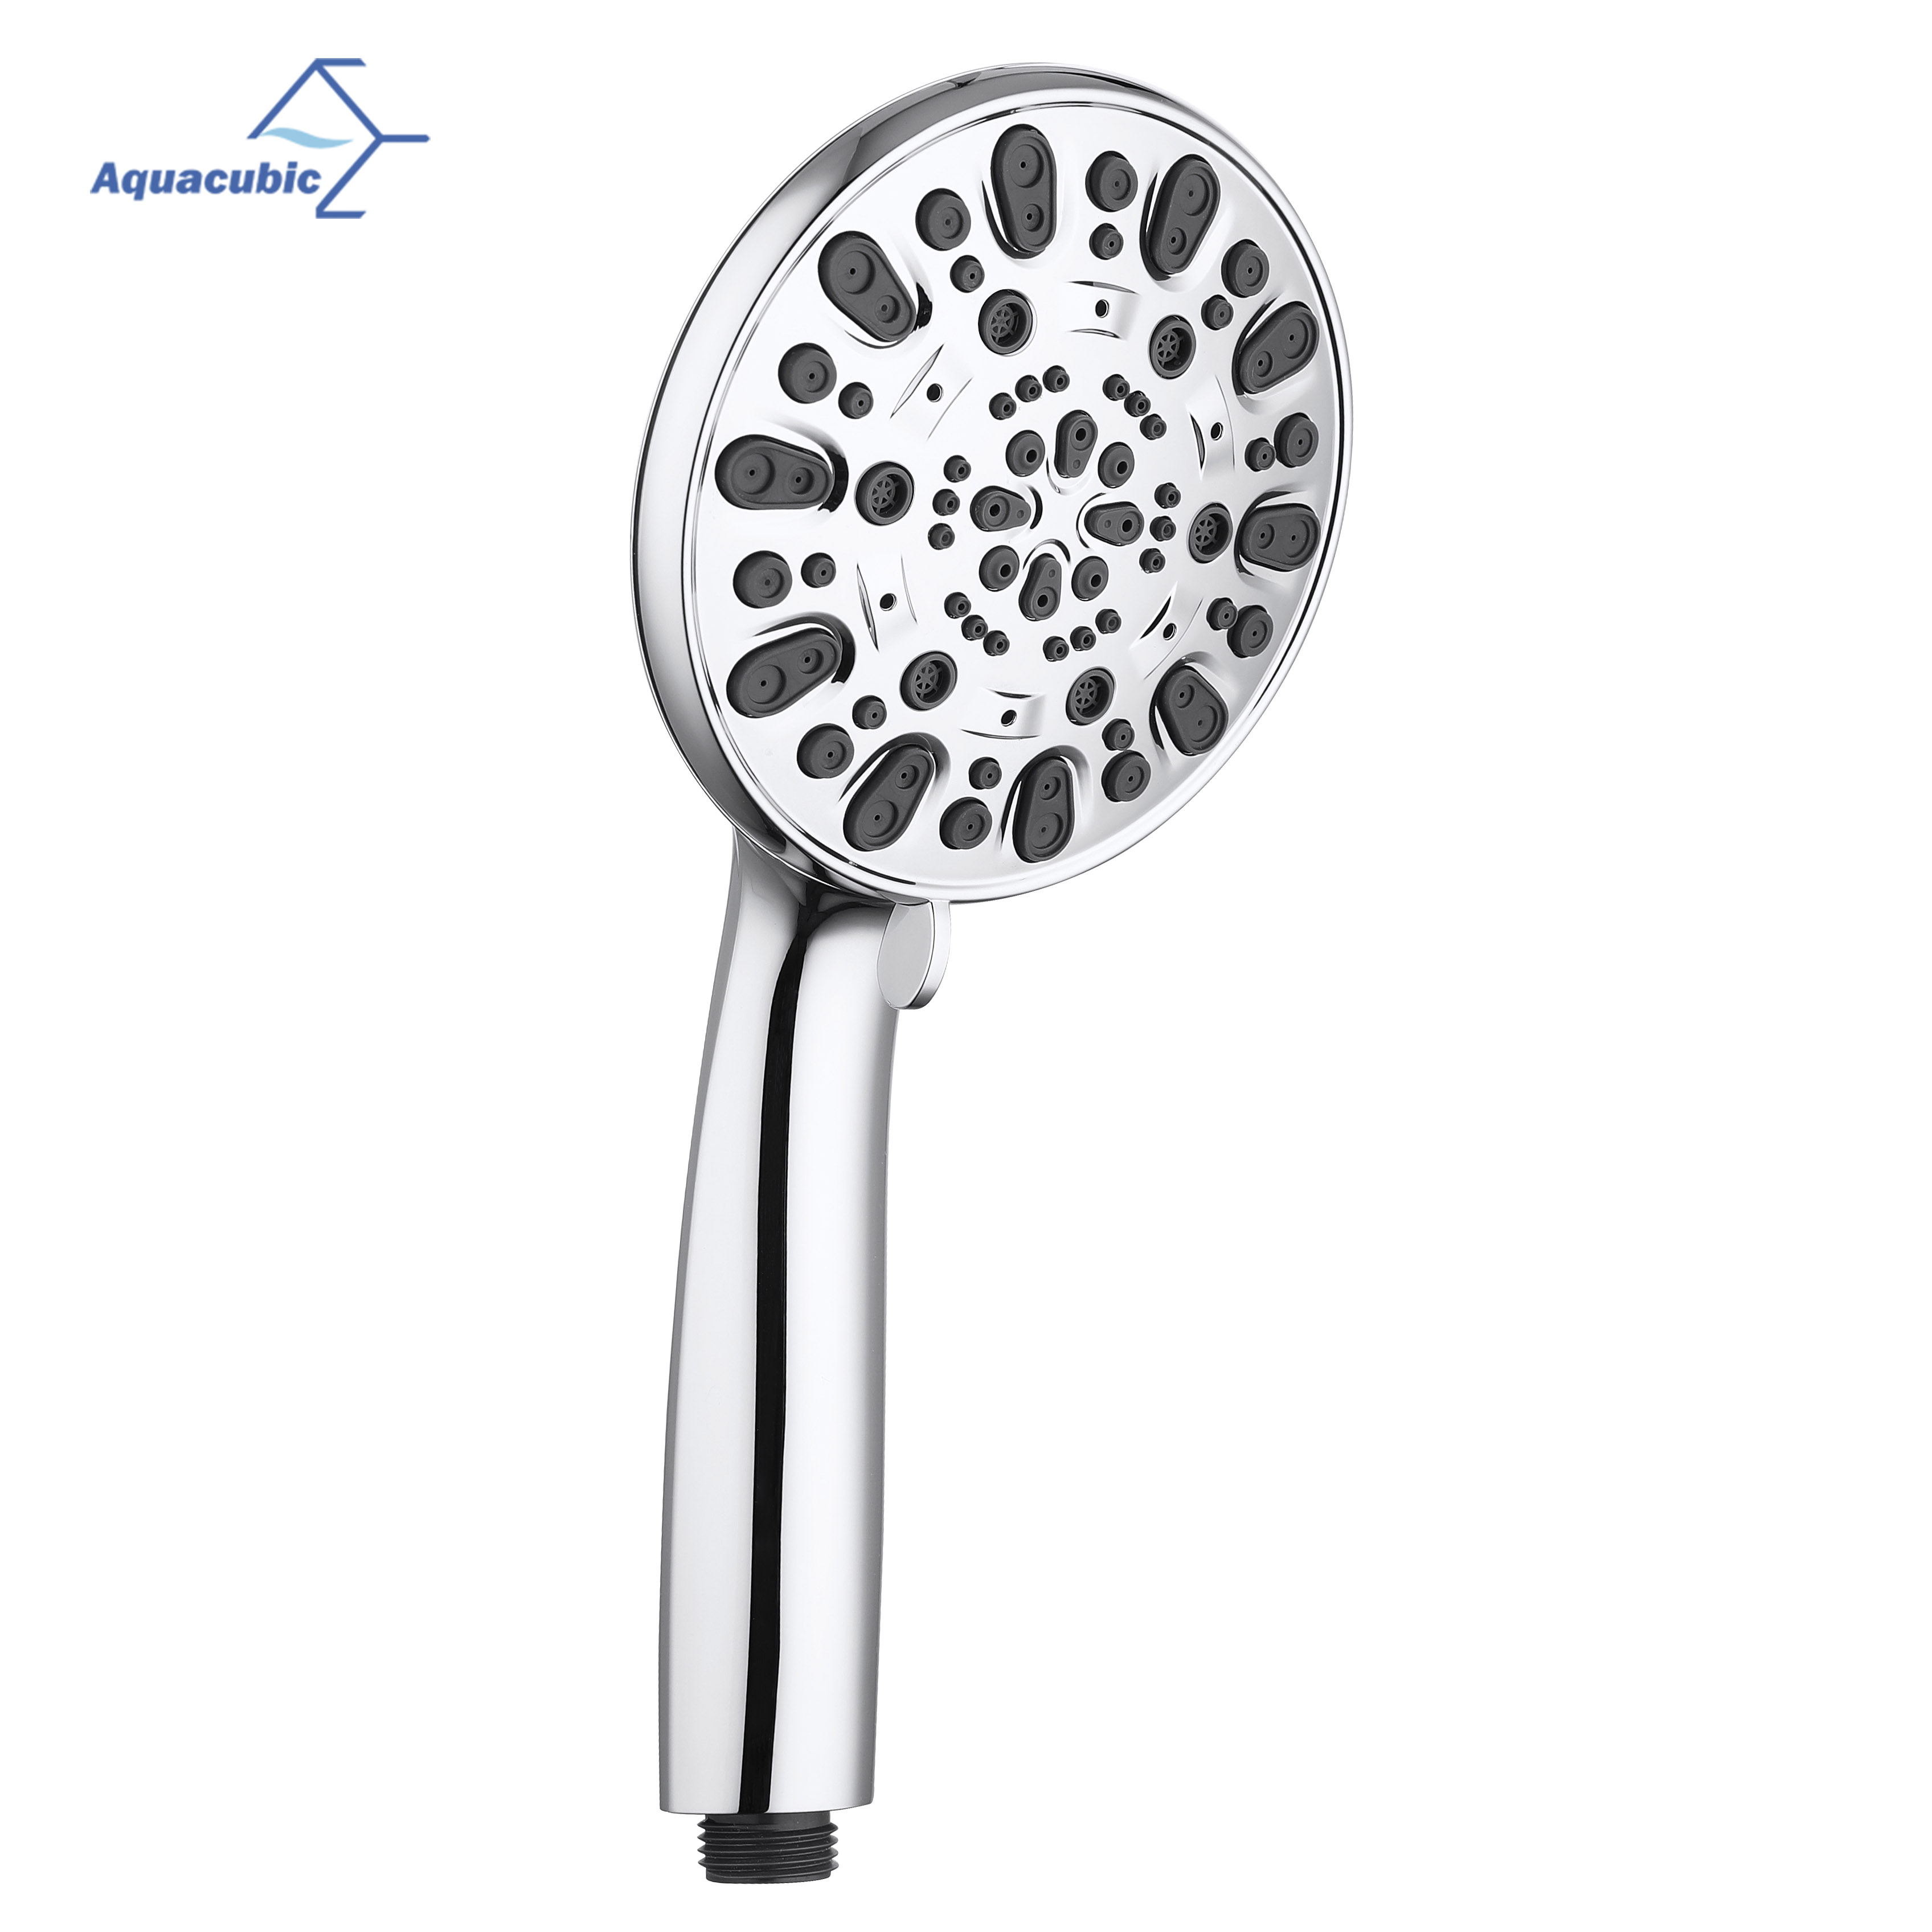 Handheld Showerhead & Rain Shower Combo Shower Head System Hose 3-way Water Diverter with Stainless Steel 5" Face Dual 2 in 1